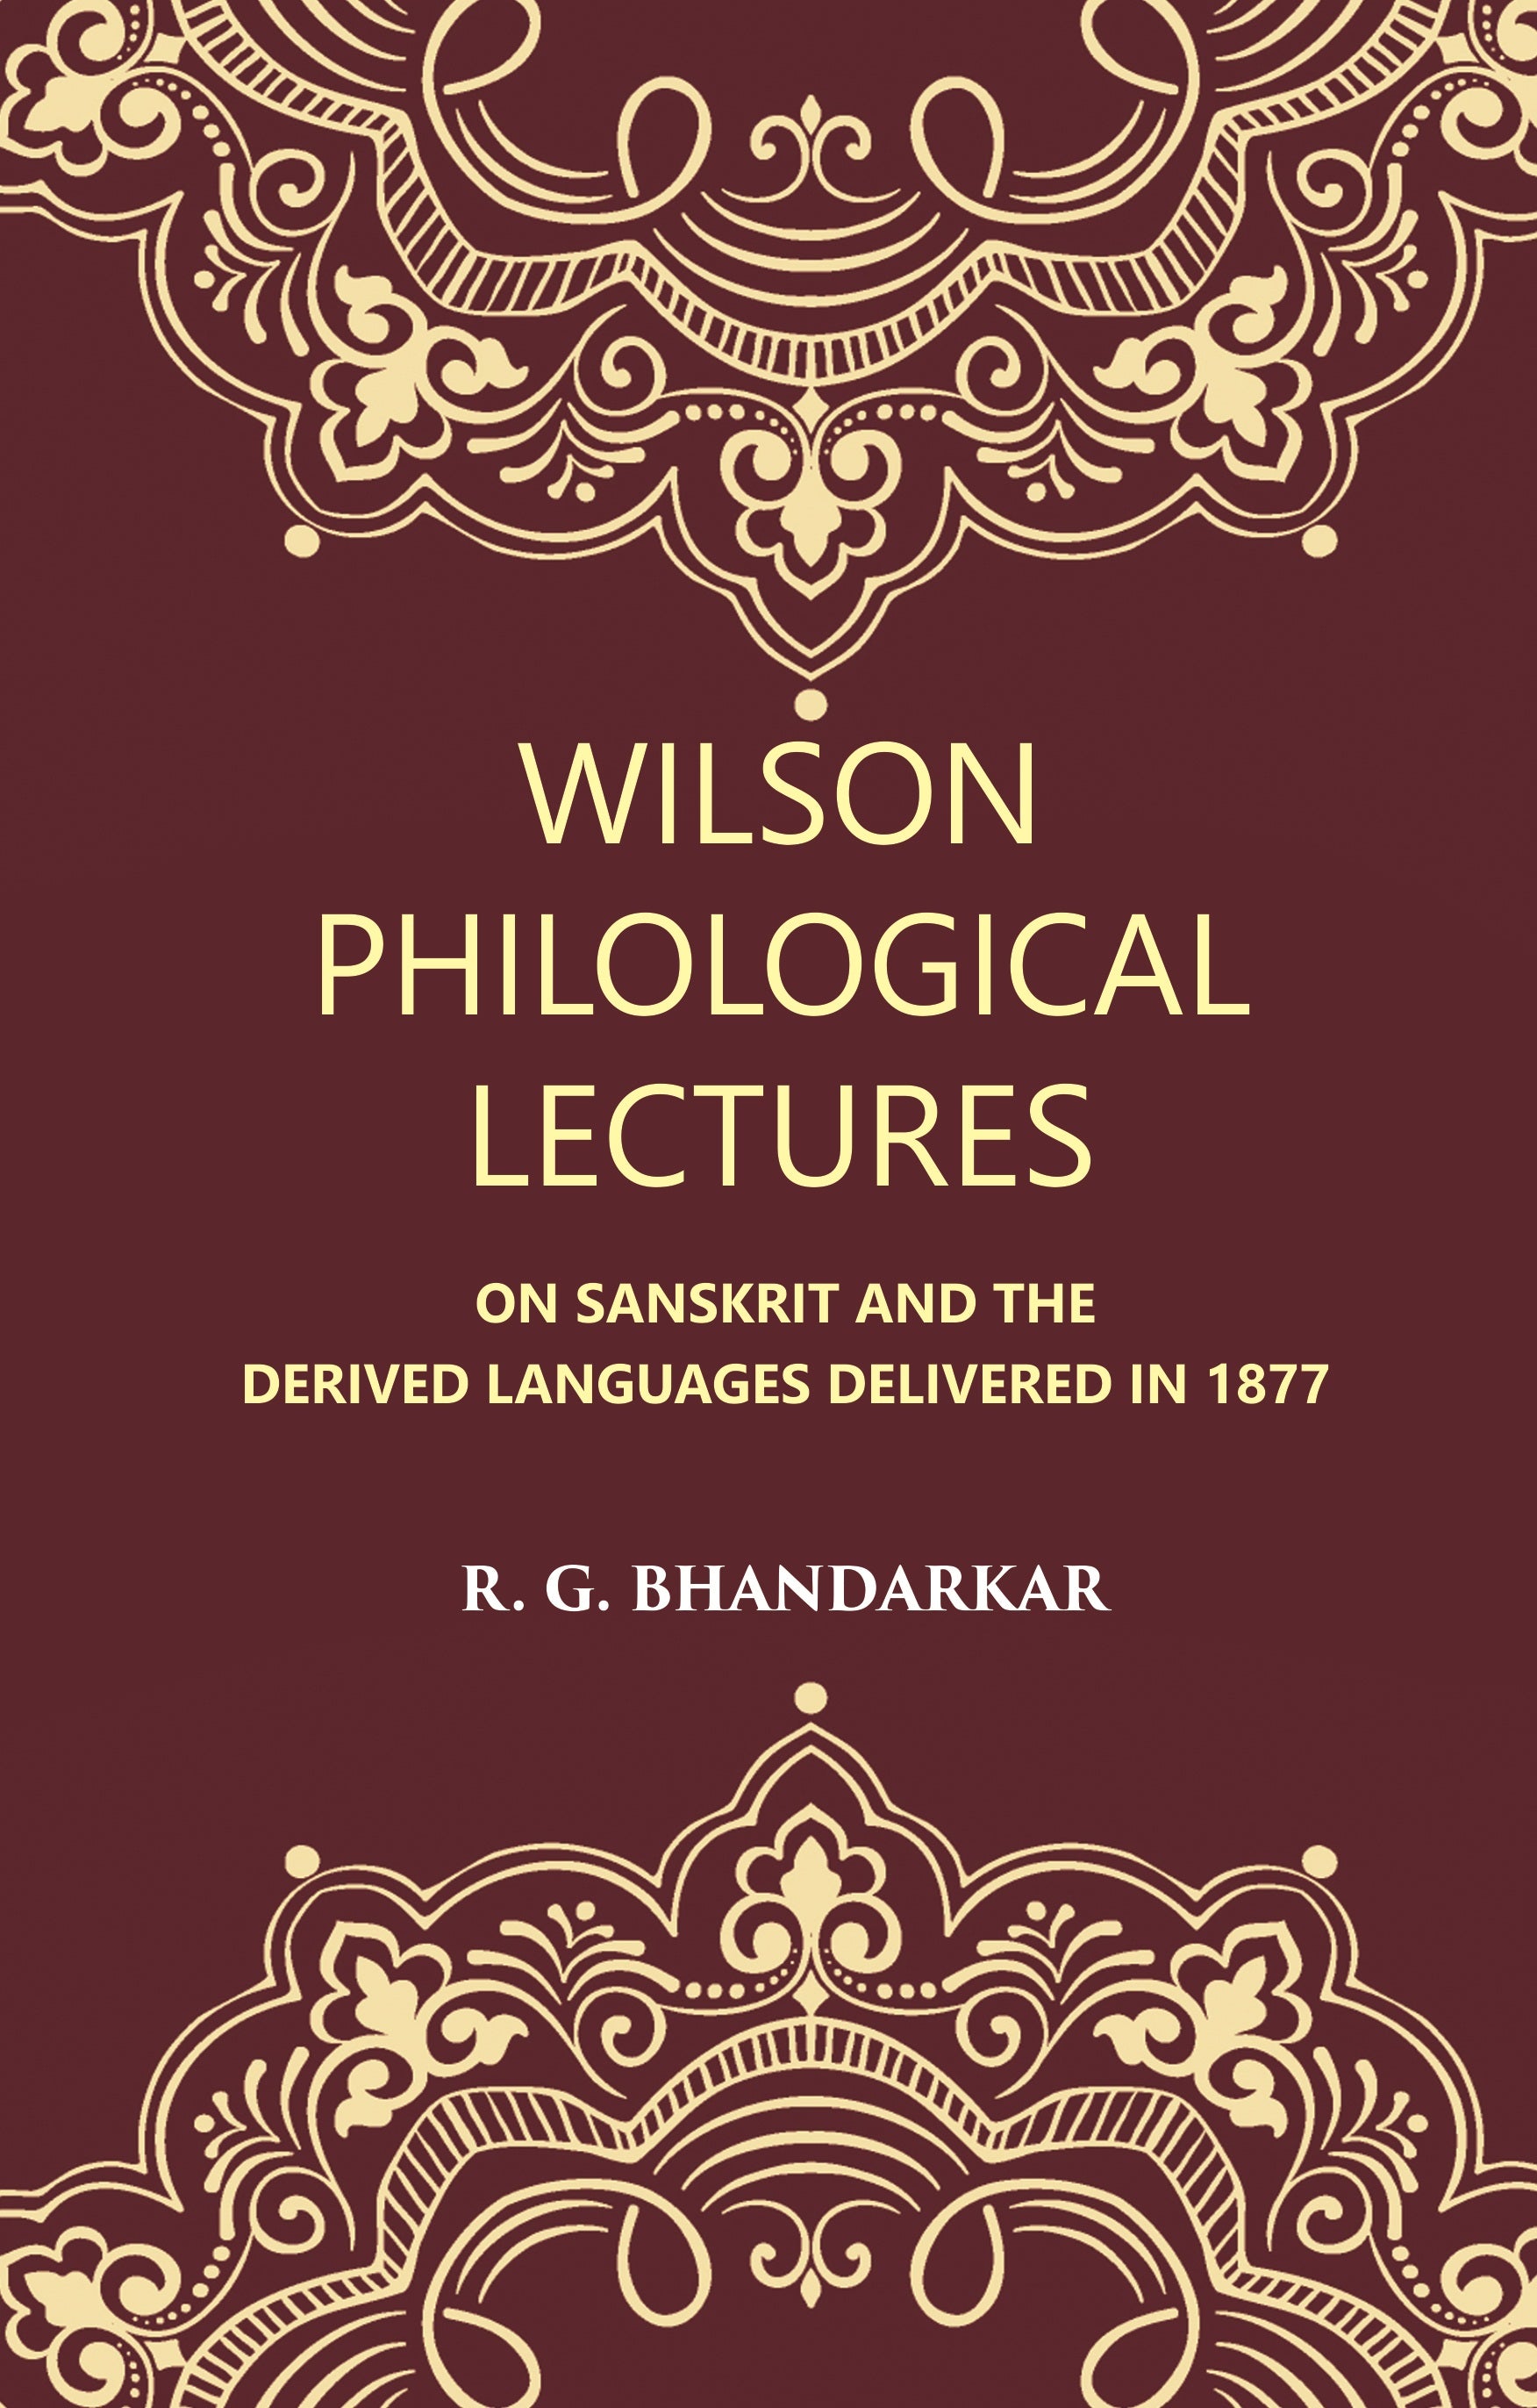 Wilson Philological Lectures: ON SANSKRIT AND THE DERIVED LANGUAGES DELIVERED IN 1877